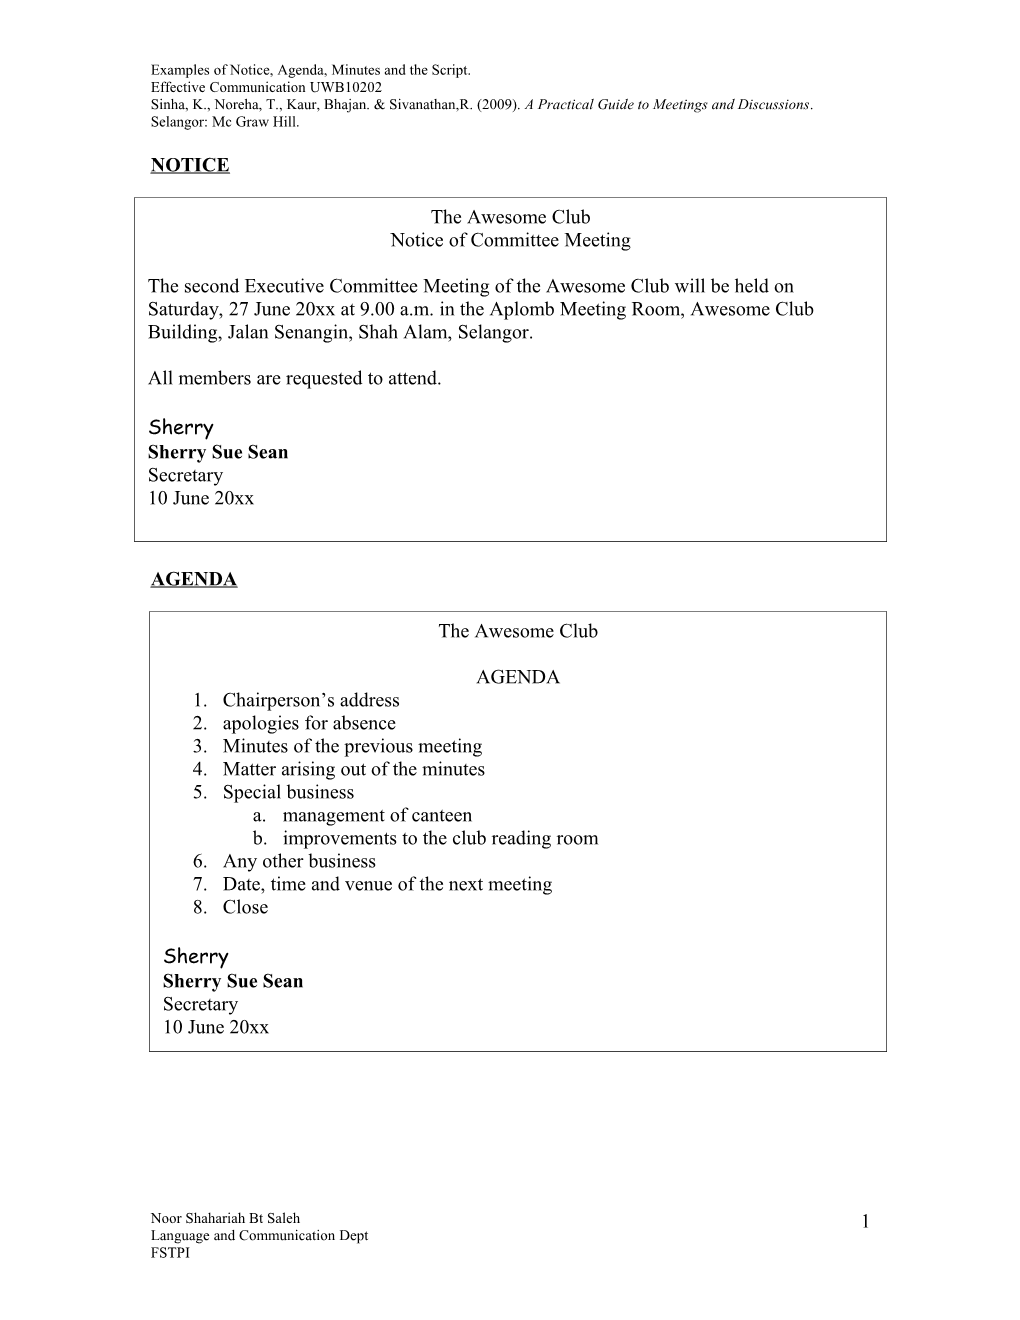 Examples of Notice, Agenda, Minutes and the Script